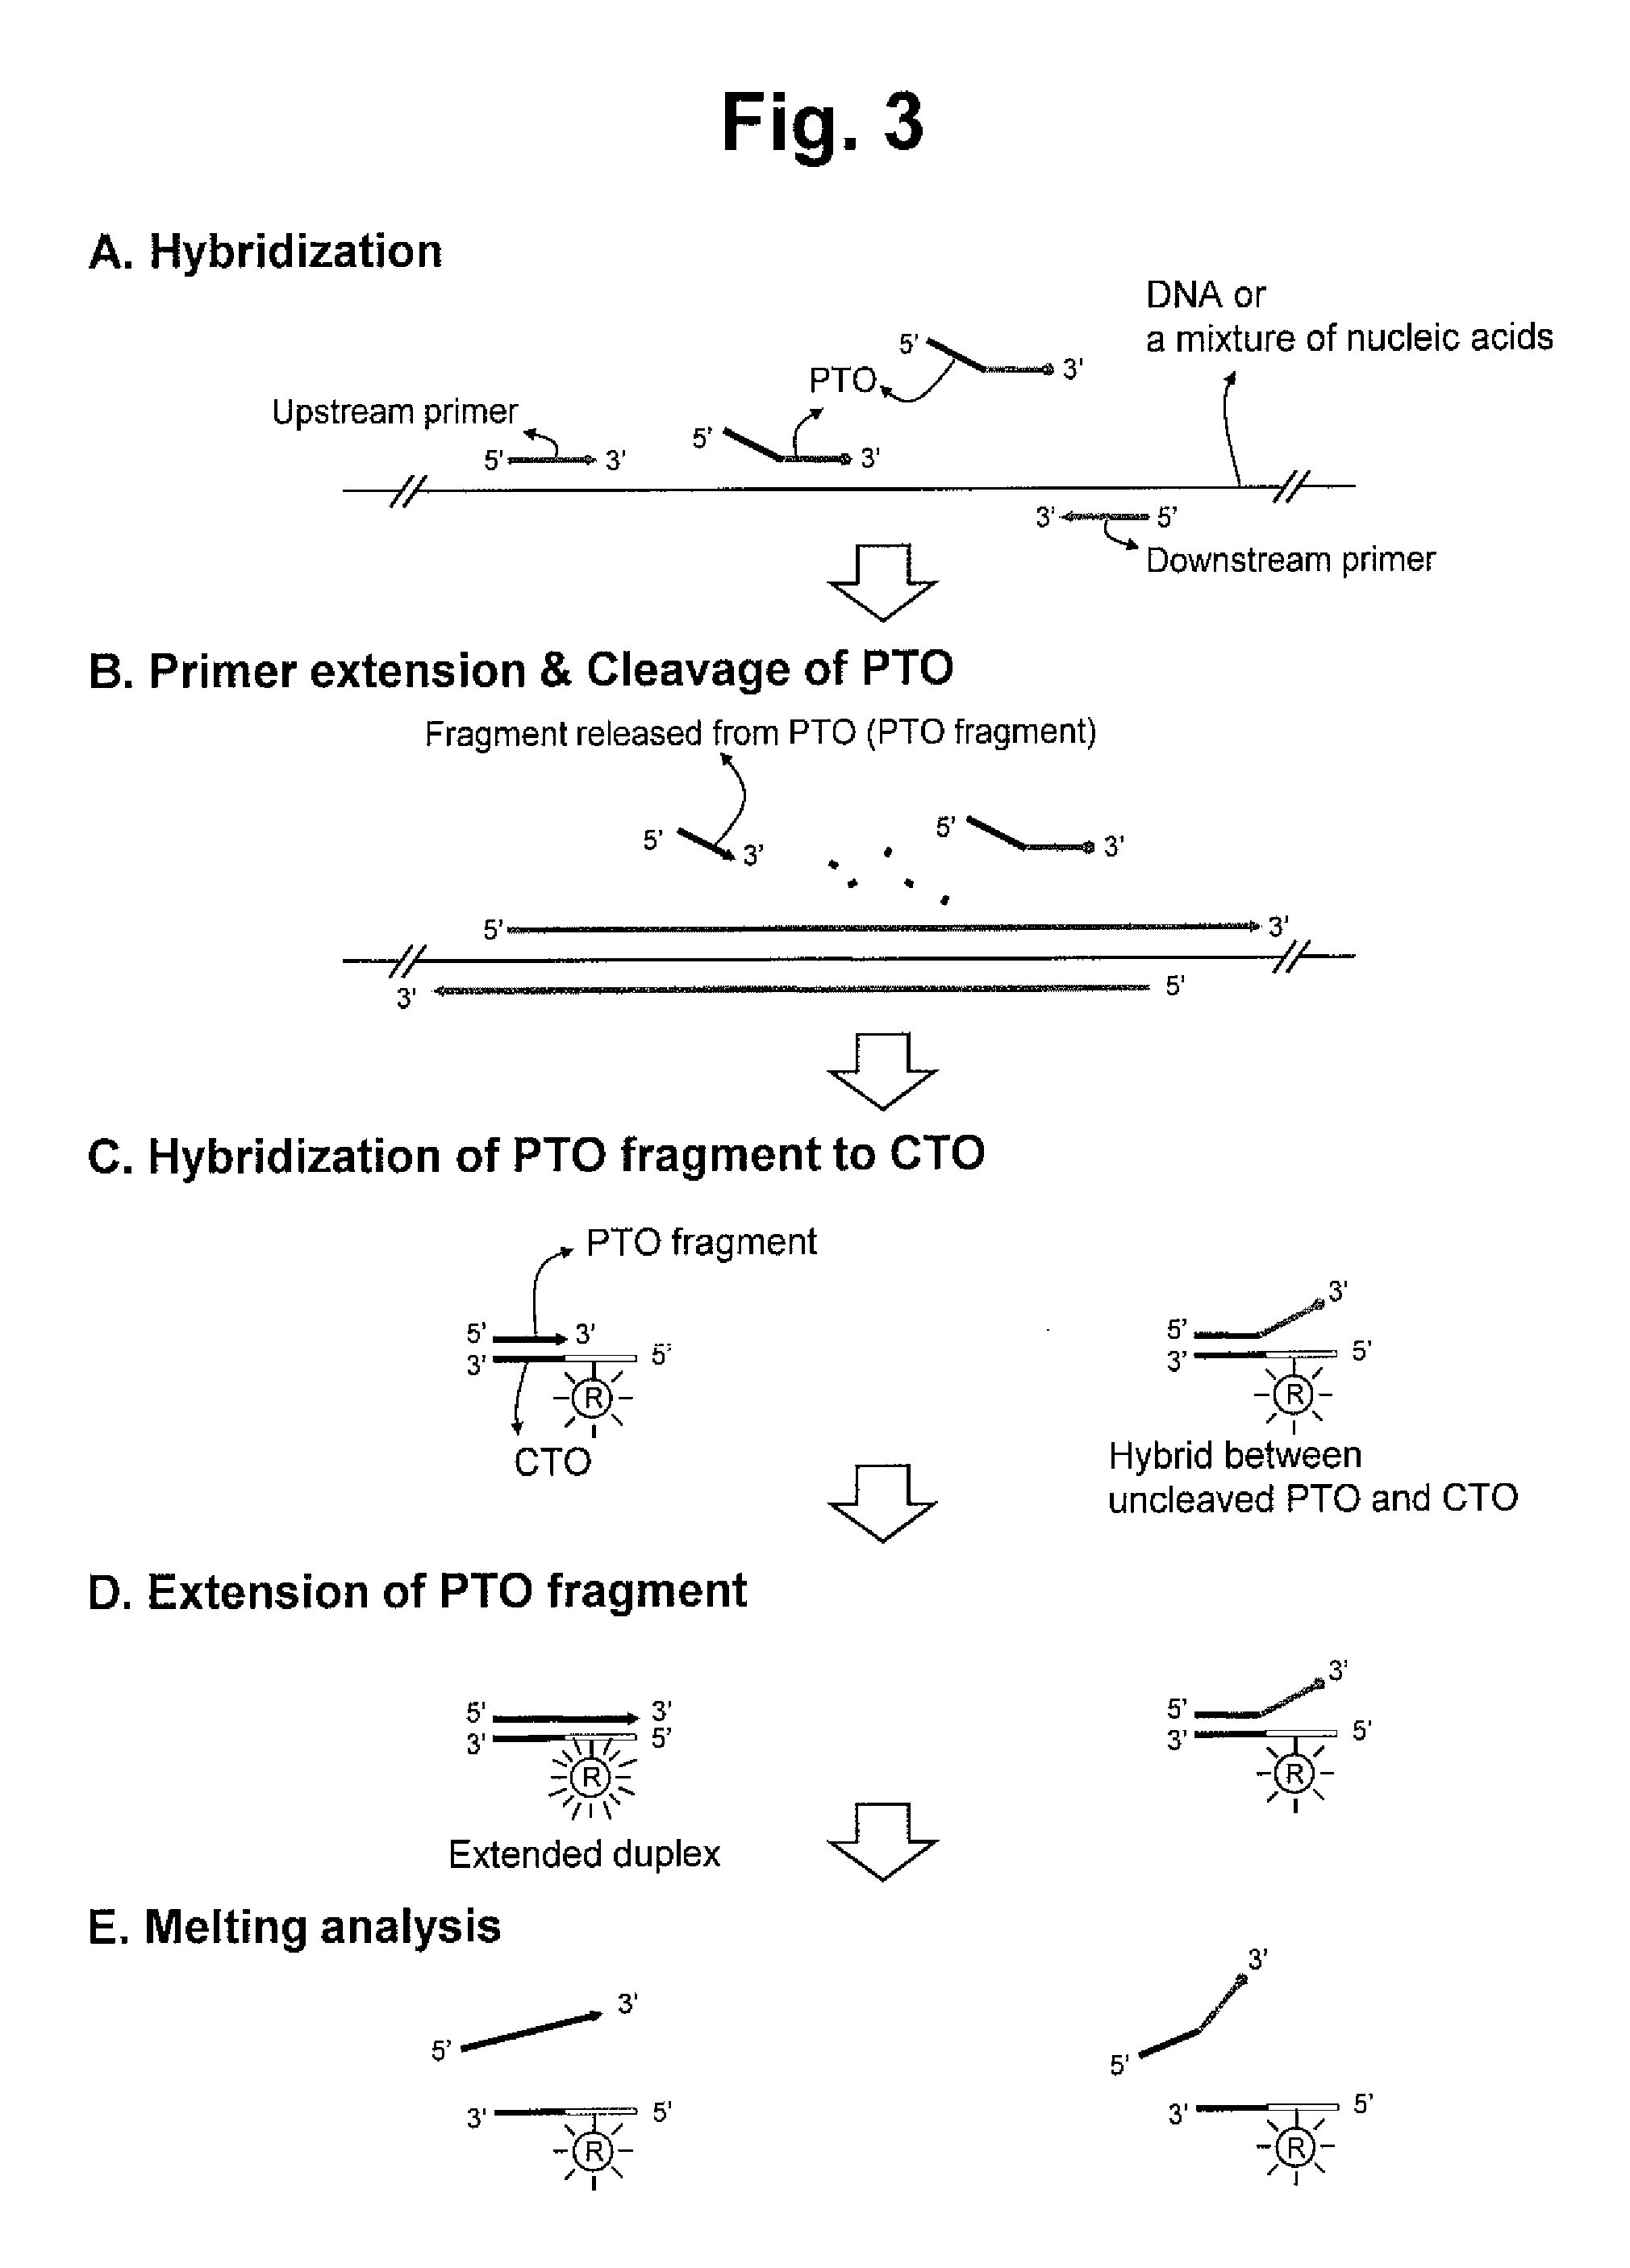 Detection of target nucleic acid sequences by PTO cleavage and extension assay